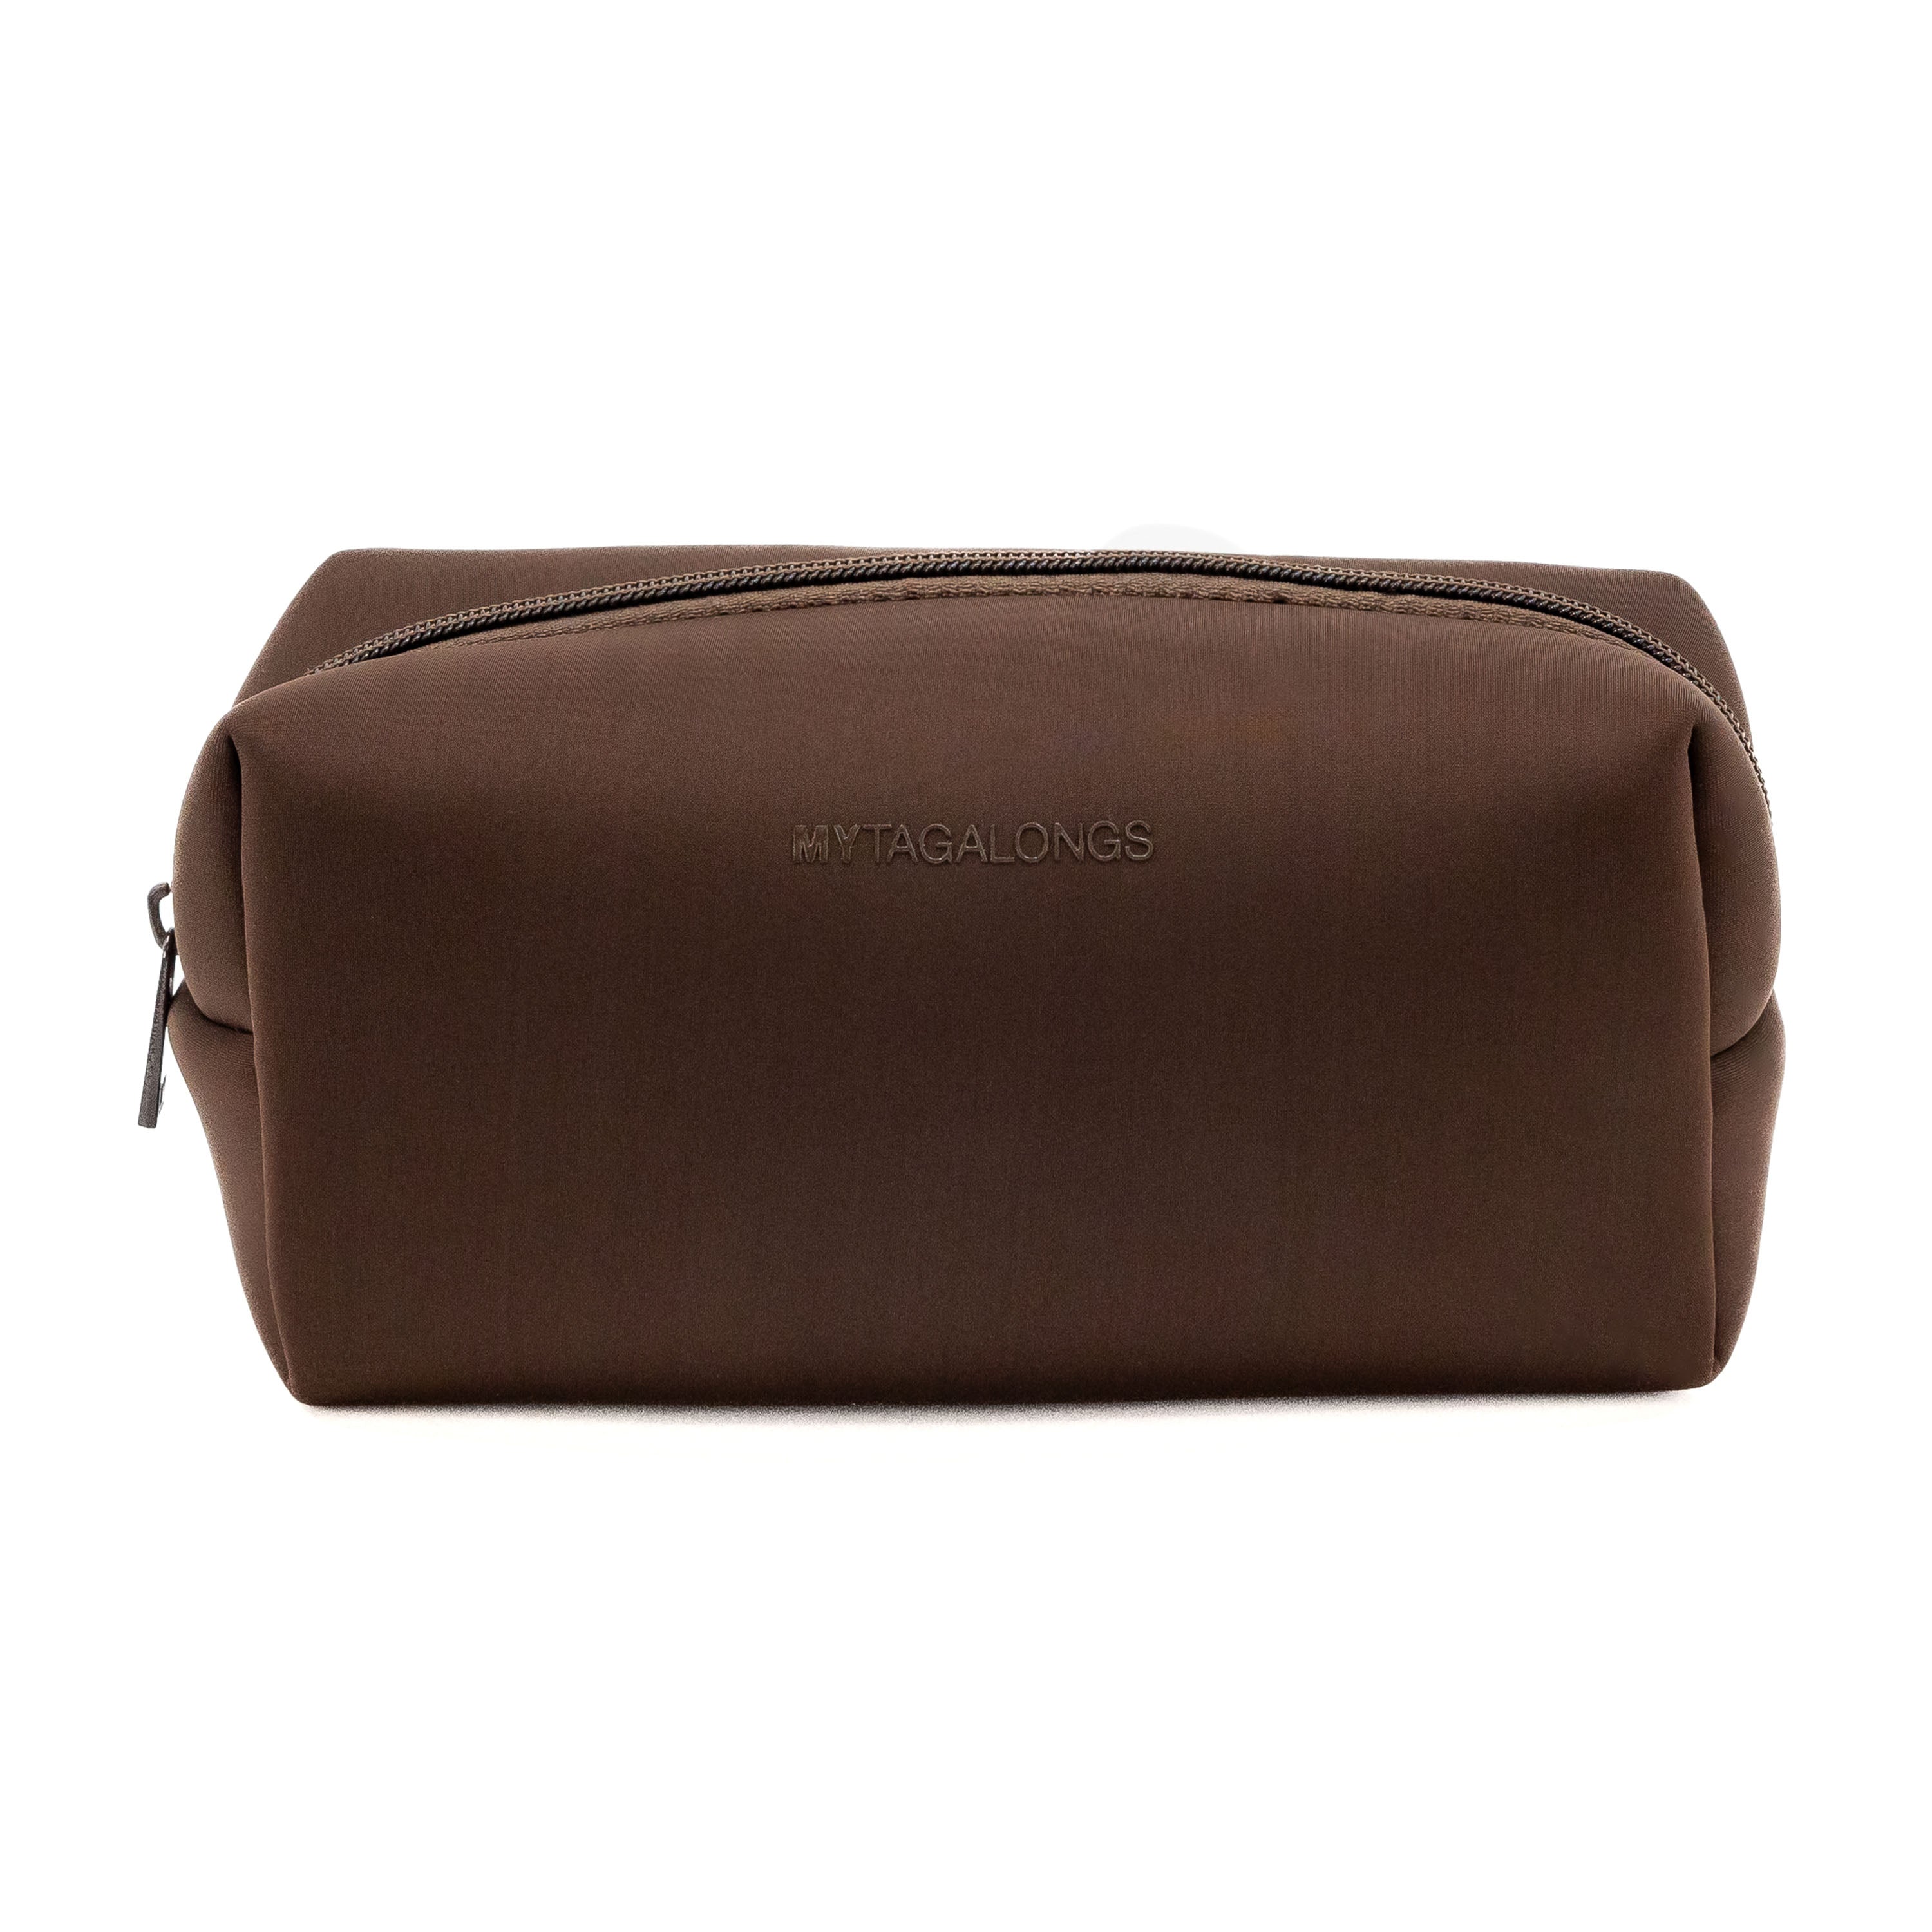 brown loaf cosmetic bag with clear brush pouch